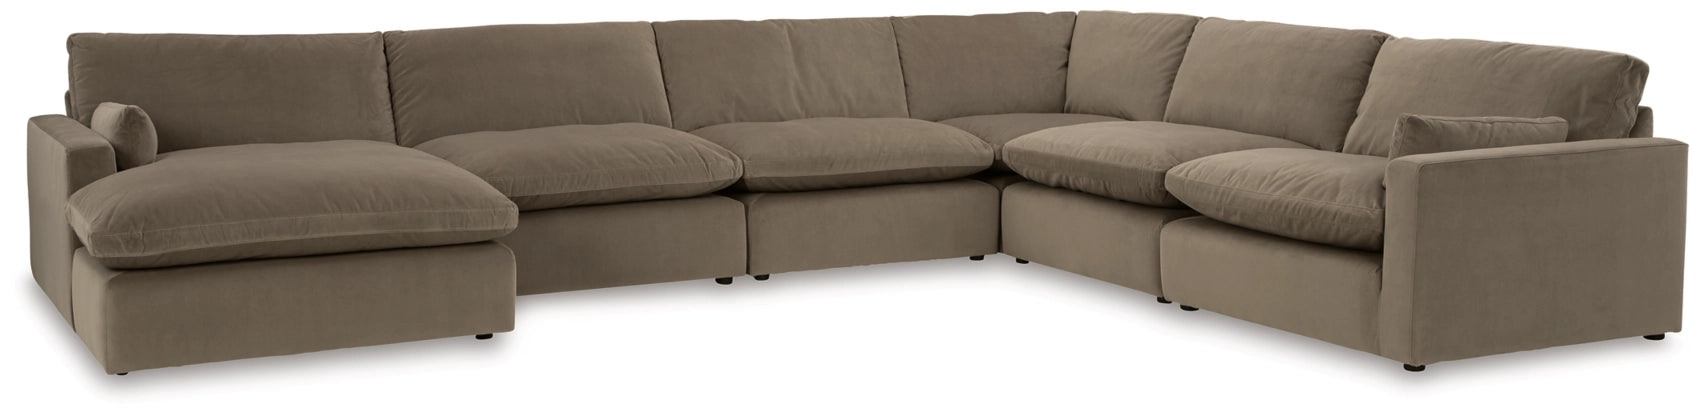 Sophie 6-Piece Sectional with RHF Chaise - Cocoa